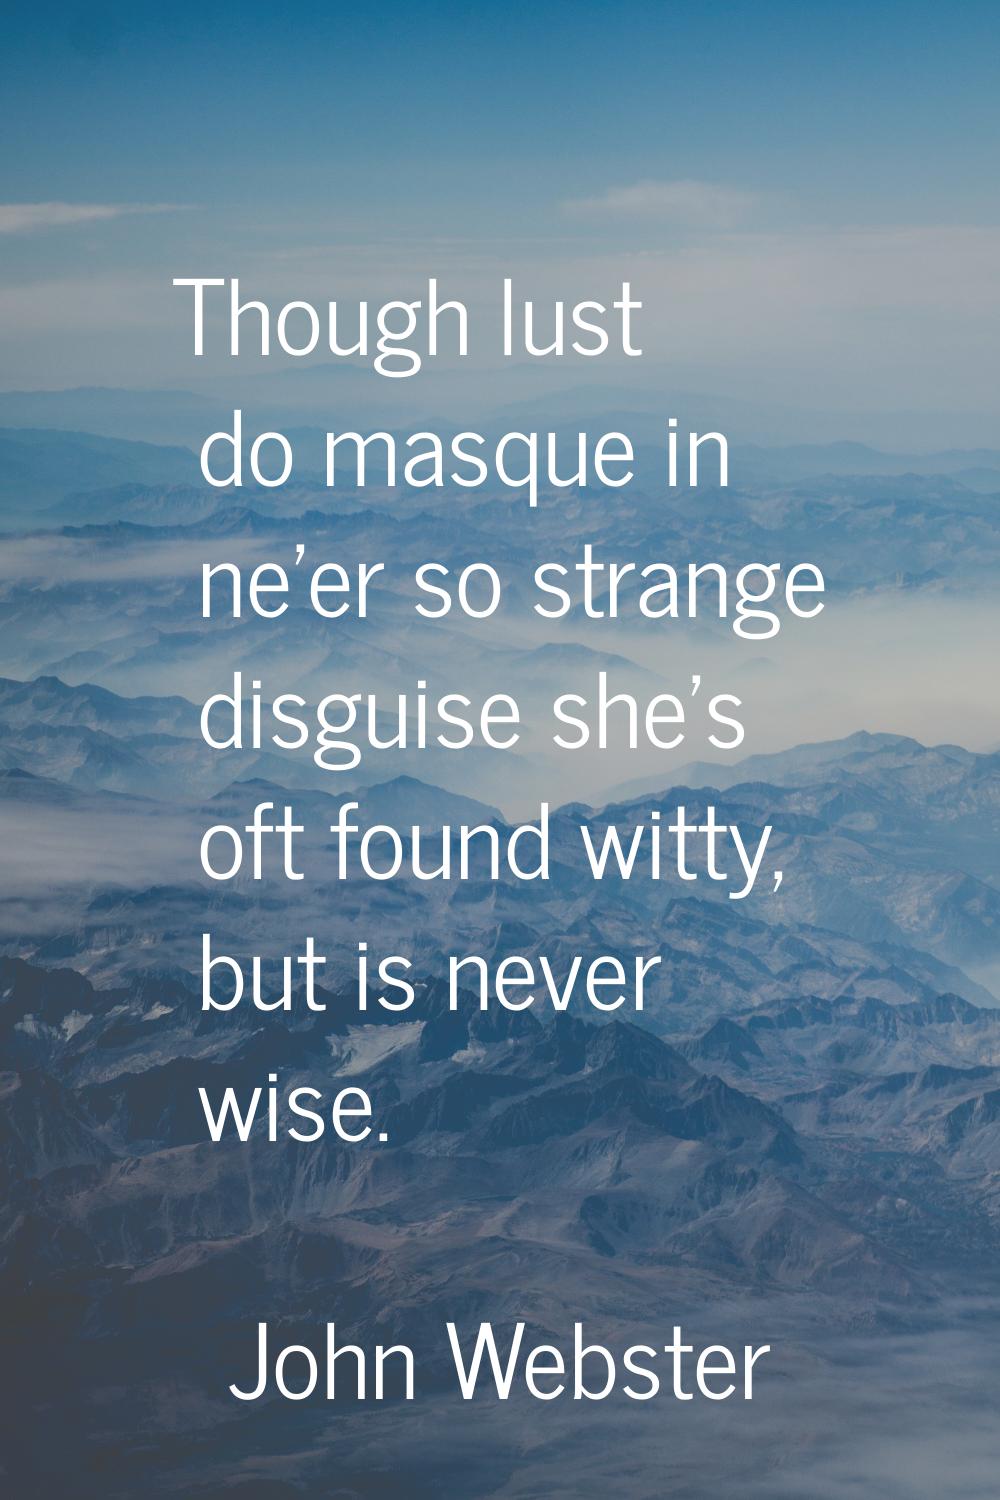 Though lust do masque in ne'er so strange disguise she's oft found witty, but is never wise.